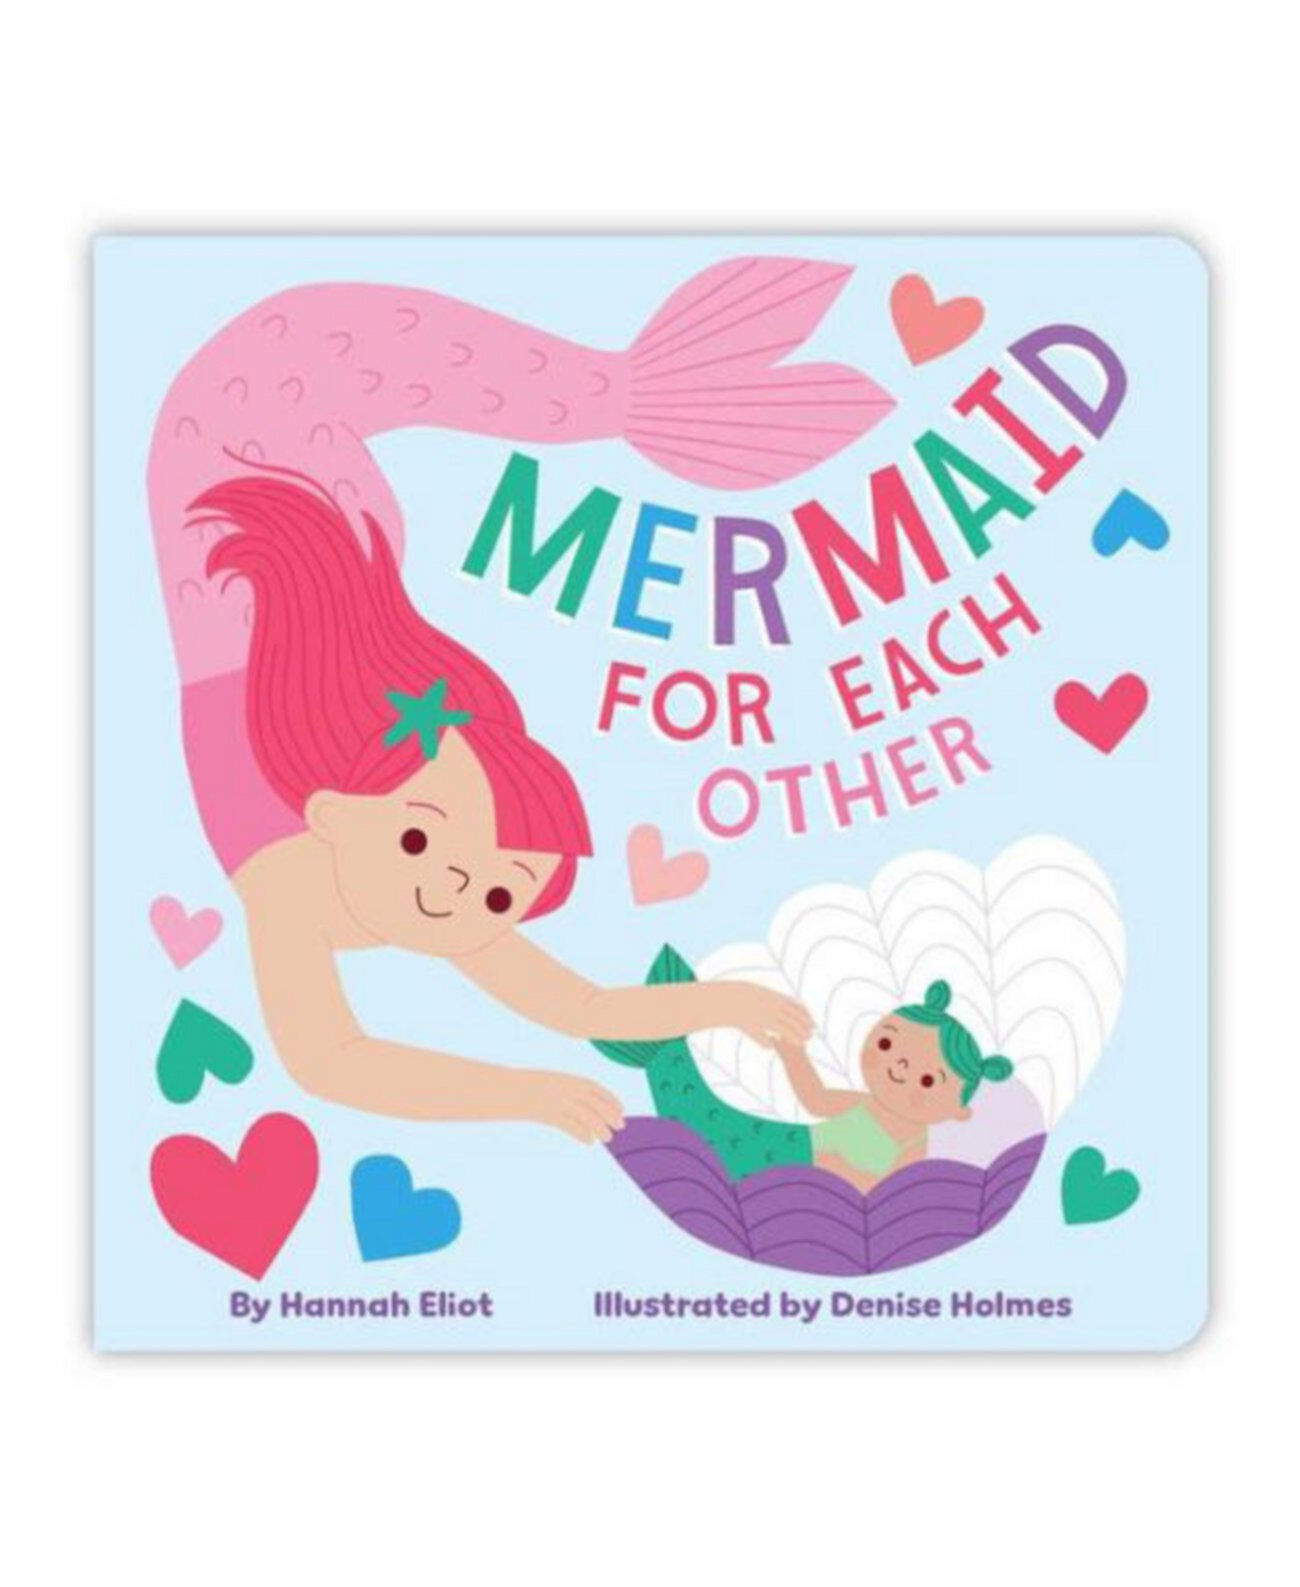 Mermaid For Each Other by Hannah Eliot Barnes & Noble